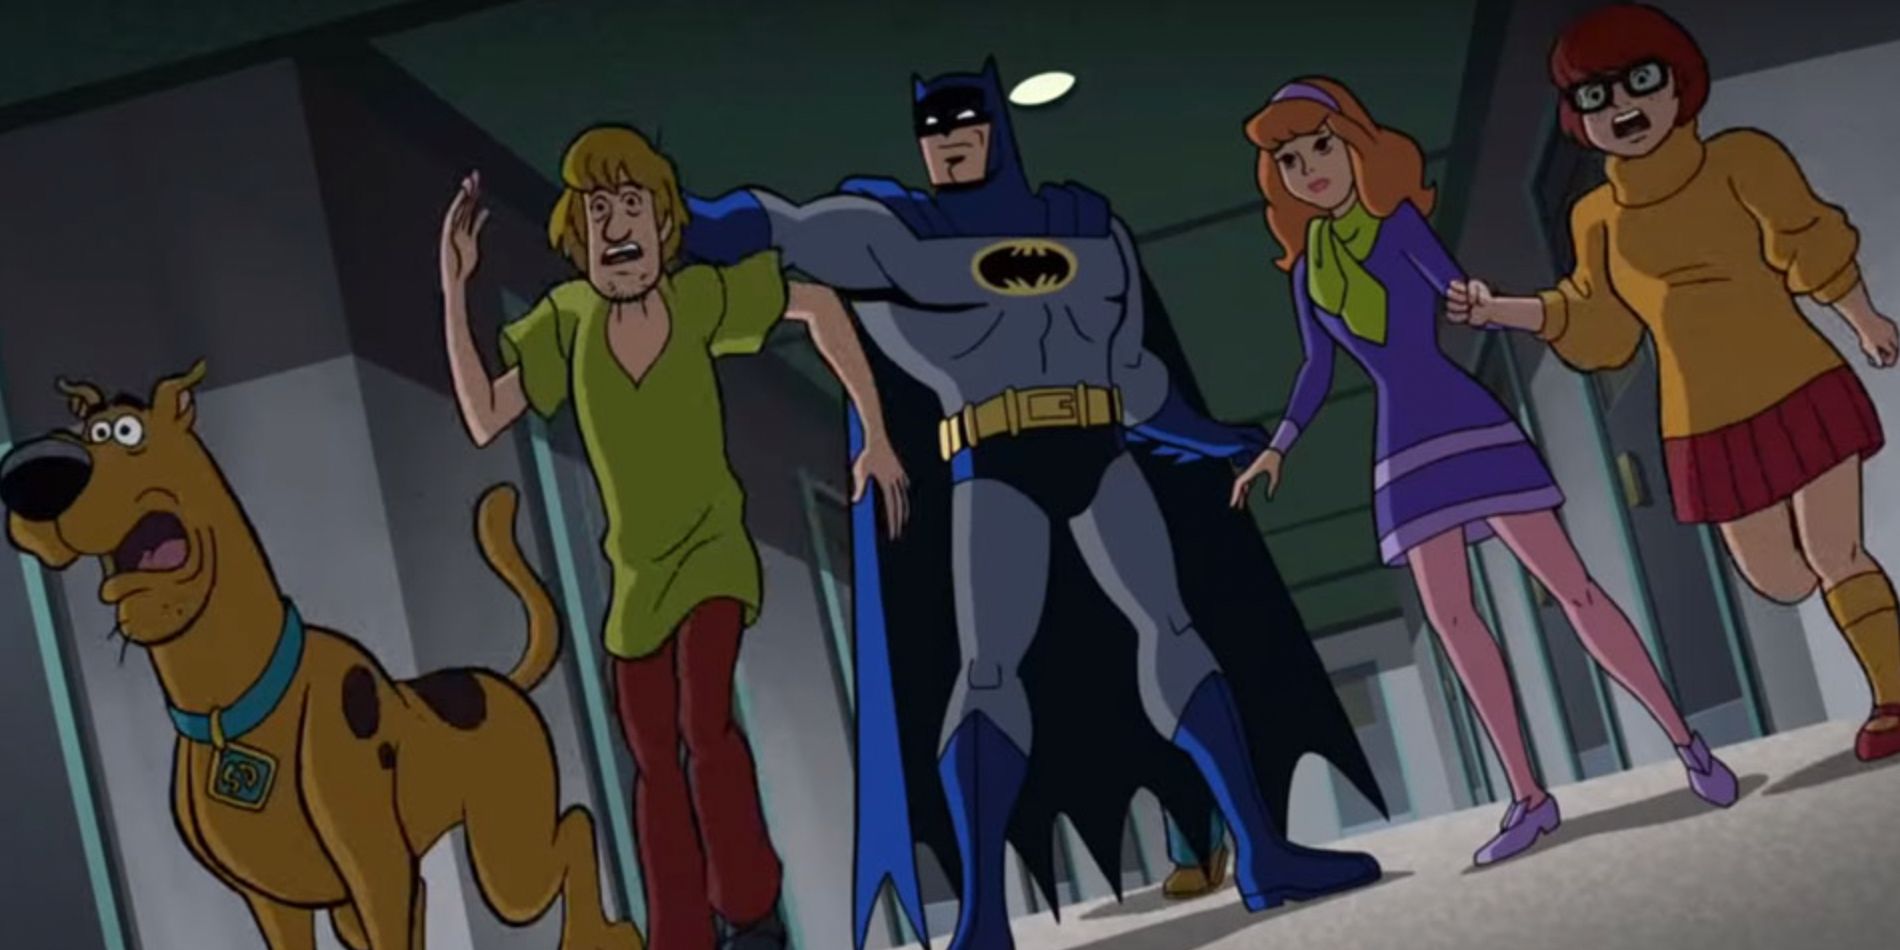 Batman holds onto Shaggy while the others are surprised in Scooby Doo and Batman The Brave and the Bold